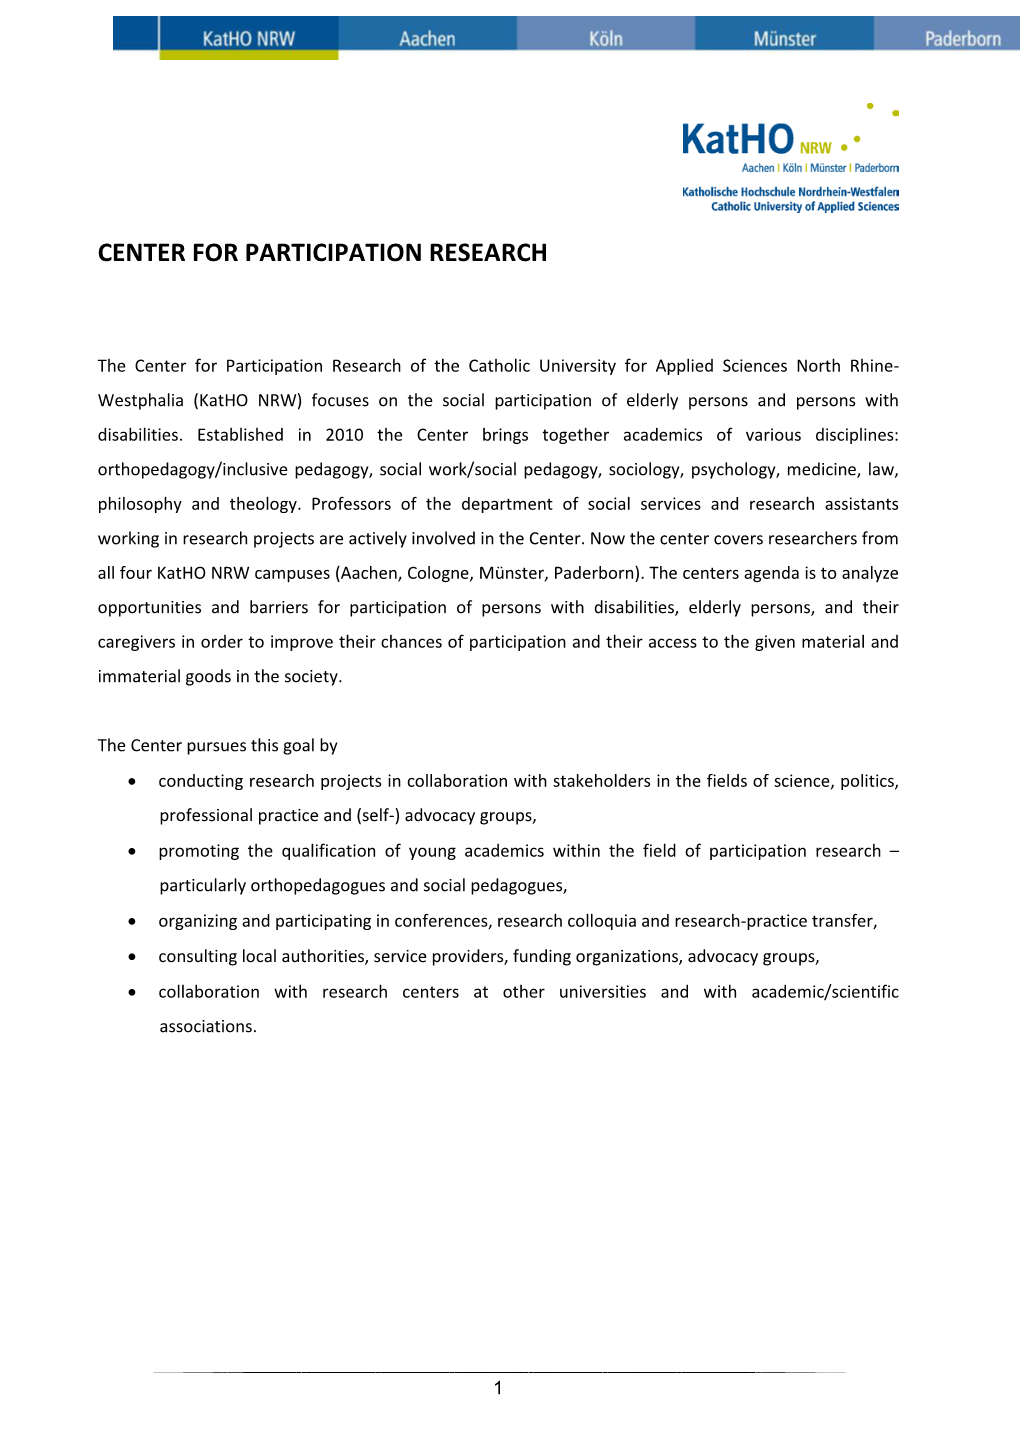 Center for Participation Research